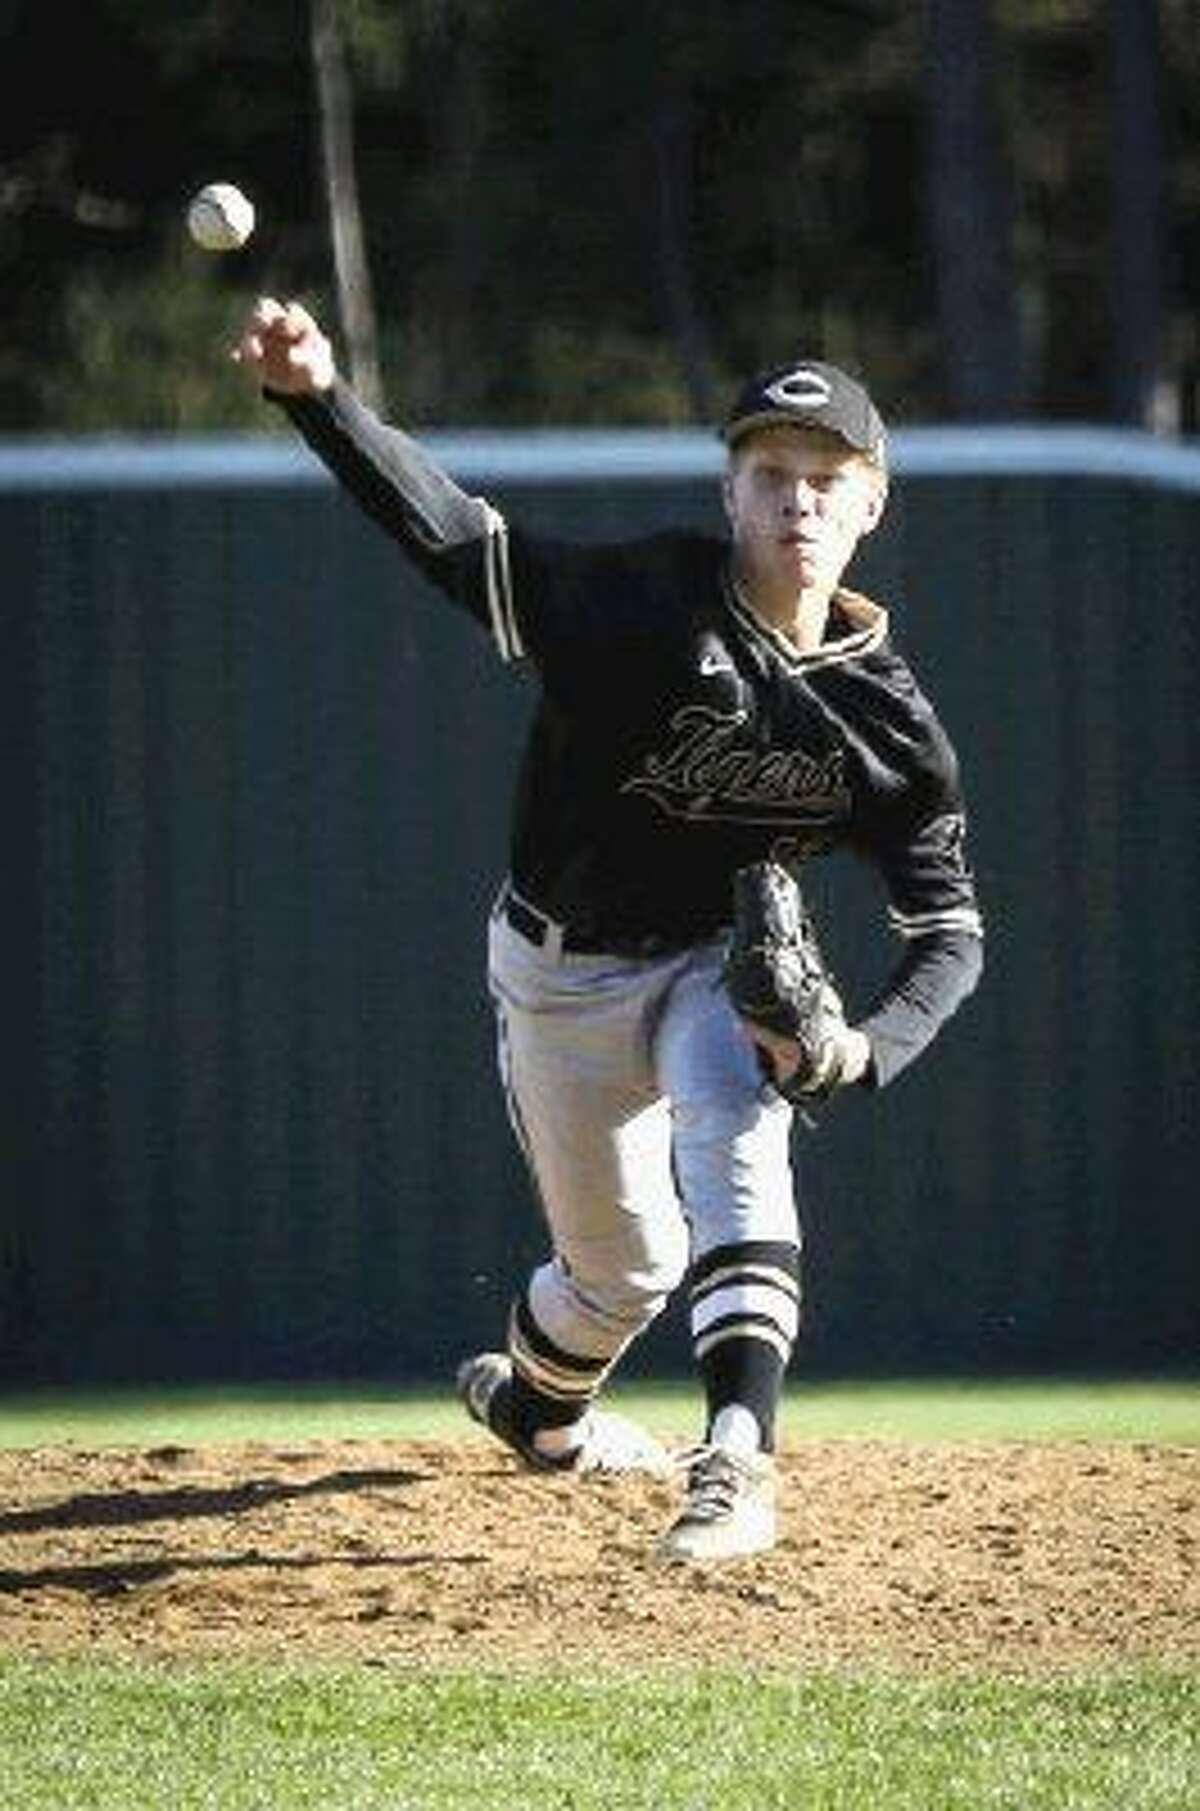 Conroe's Wesley Johnson (19) throws a pitch against Cy-Fair. To view more photos from the game, go to HCNPics.com.